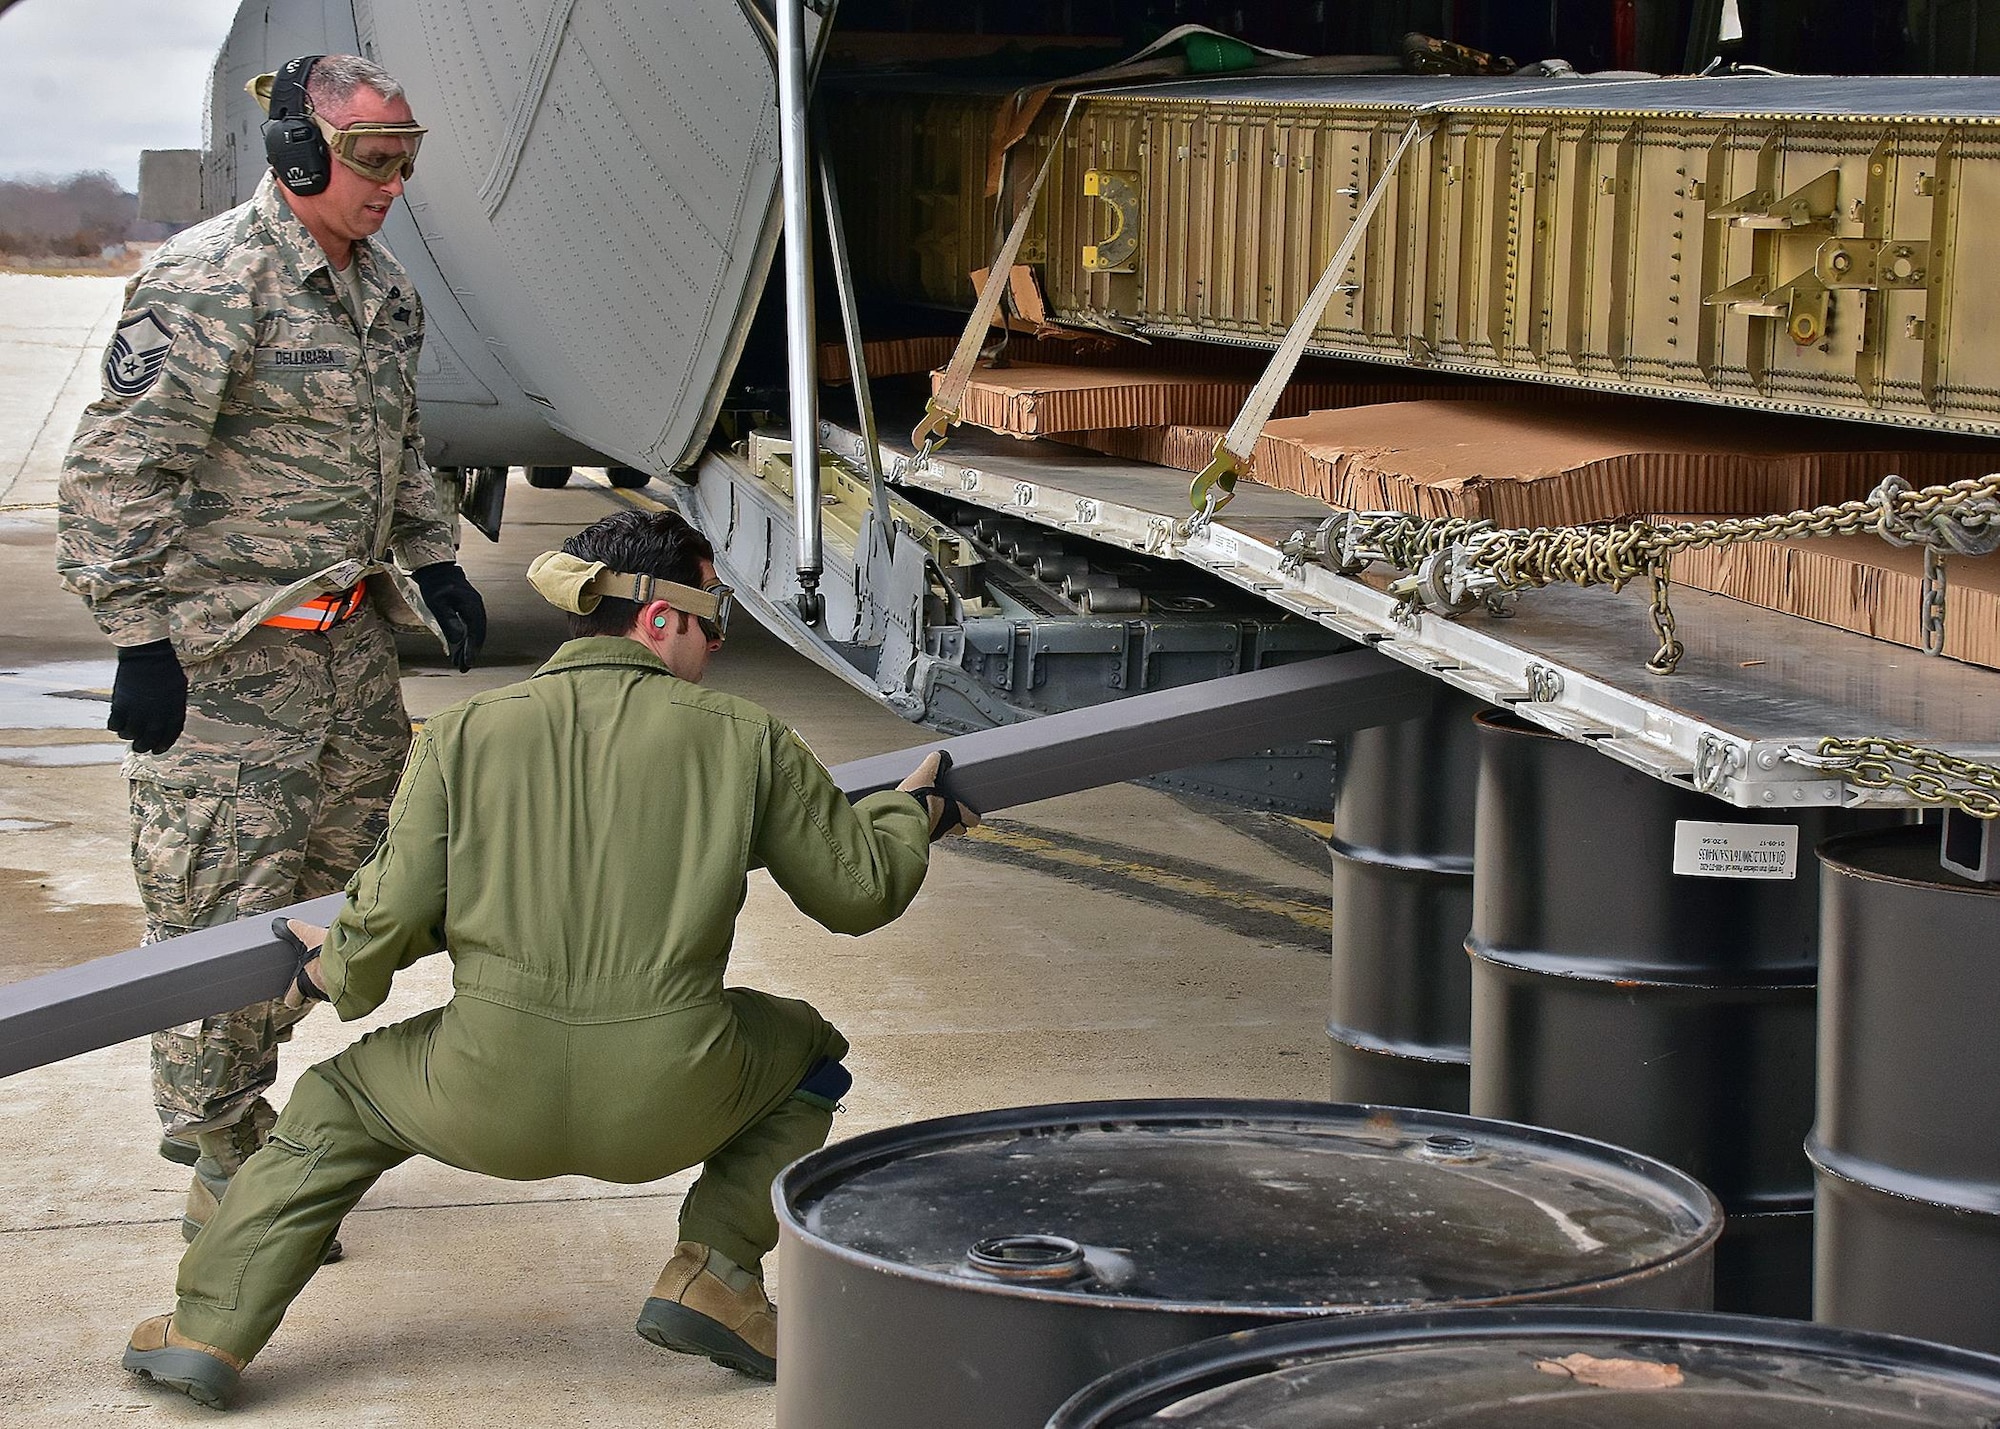 Airmen from the 143d Airlift Wing's Maintenance Group, Operations Group and Logistics Readiness Squadron work together to plan and complete the offload of a detached C-130 wing from the back of a C-130J using the Combat Offload Method B technique. The wing was secured to be used for training by Fuel Cell Airmen, Safety, and Fire personnel.